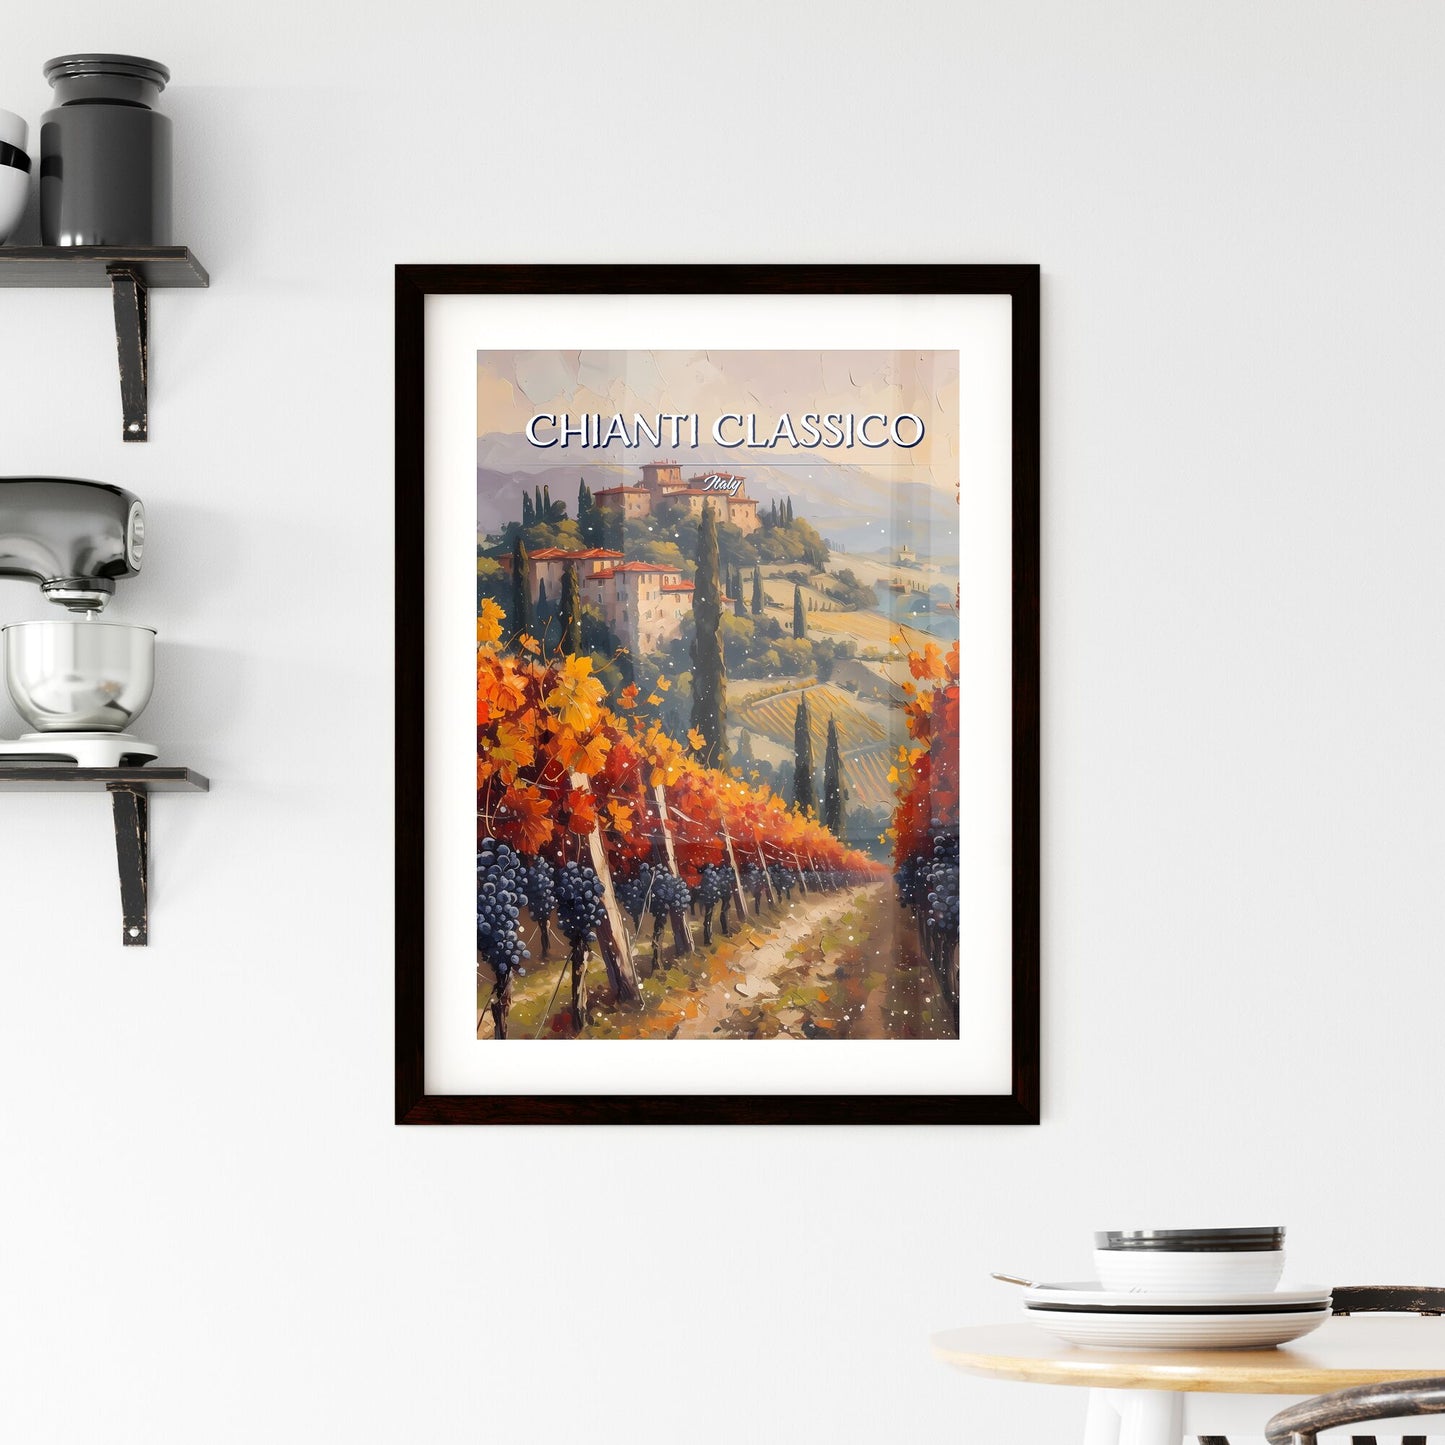 Chianti Classico, Italy - Art print of a painting of a vineyard with houses and trees Default Title